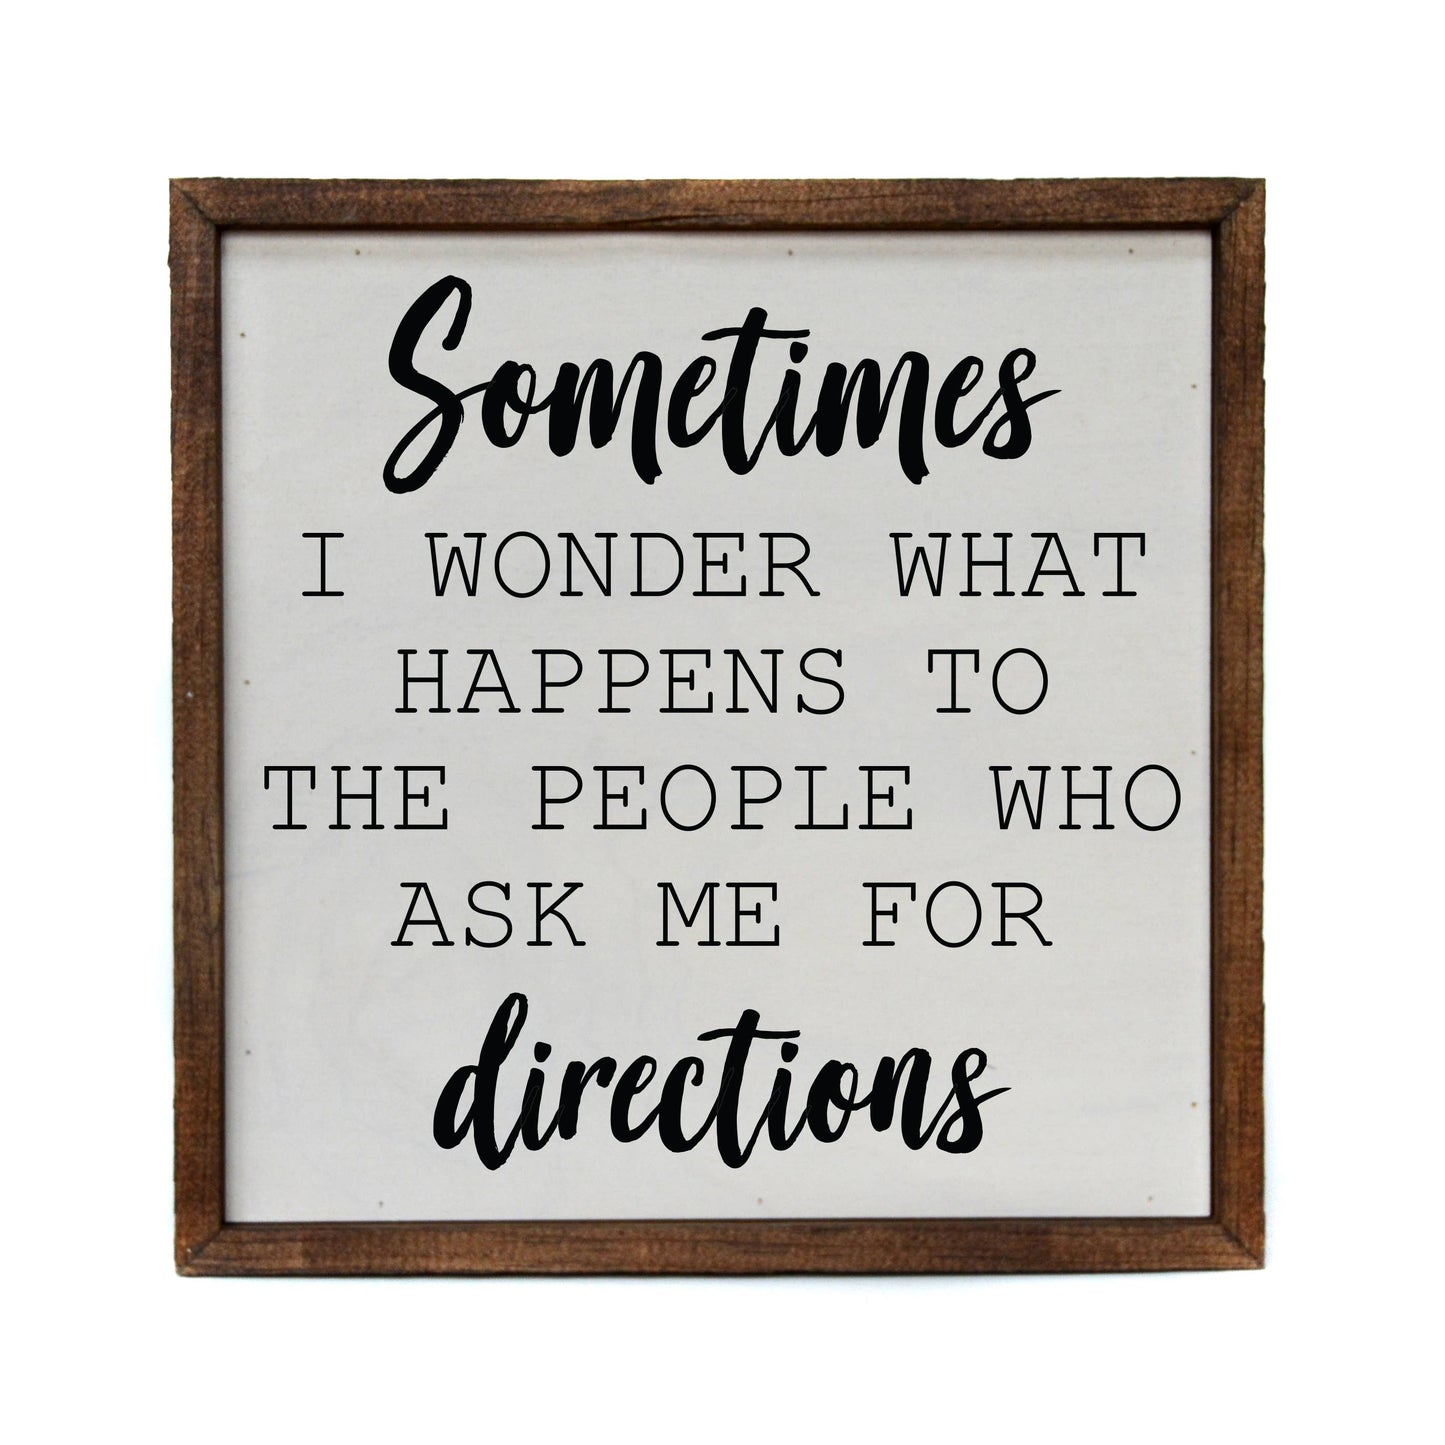 Sometimes I Wonder What Happens To The People who ask me for directions  10x10  Wood Sign